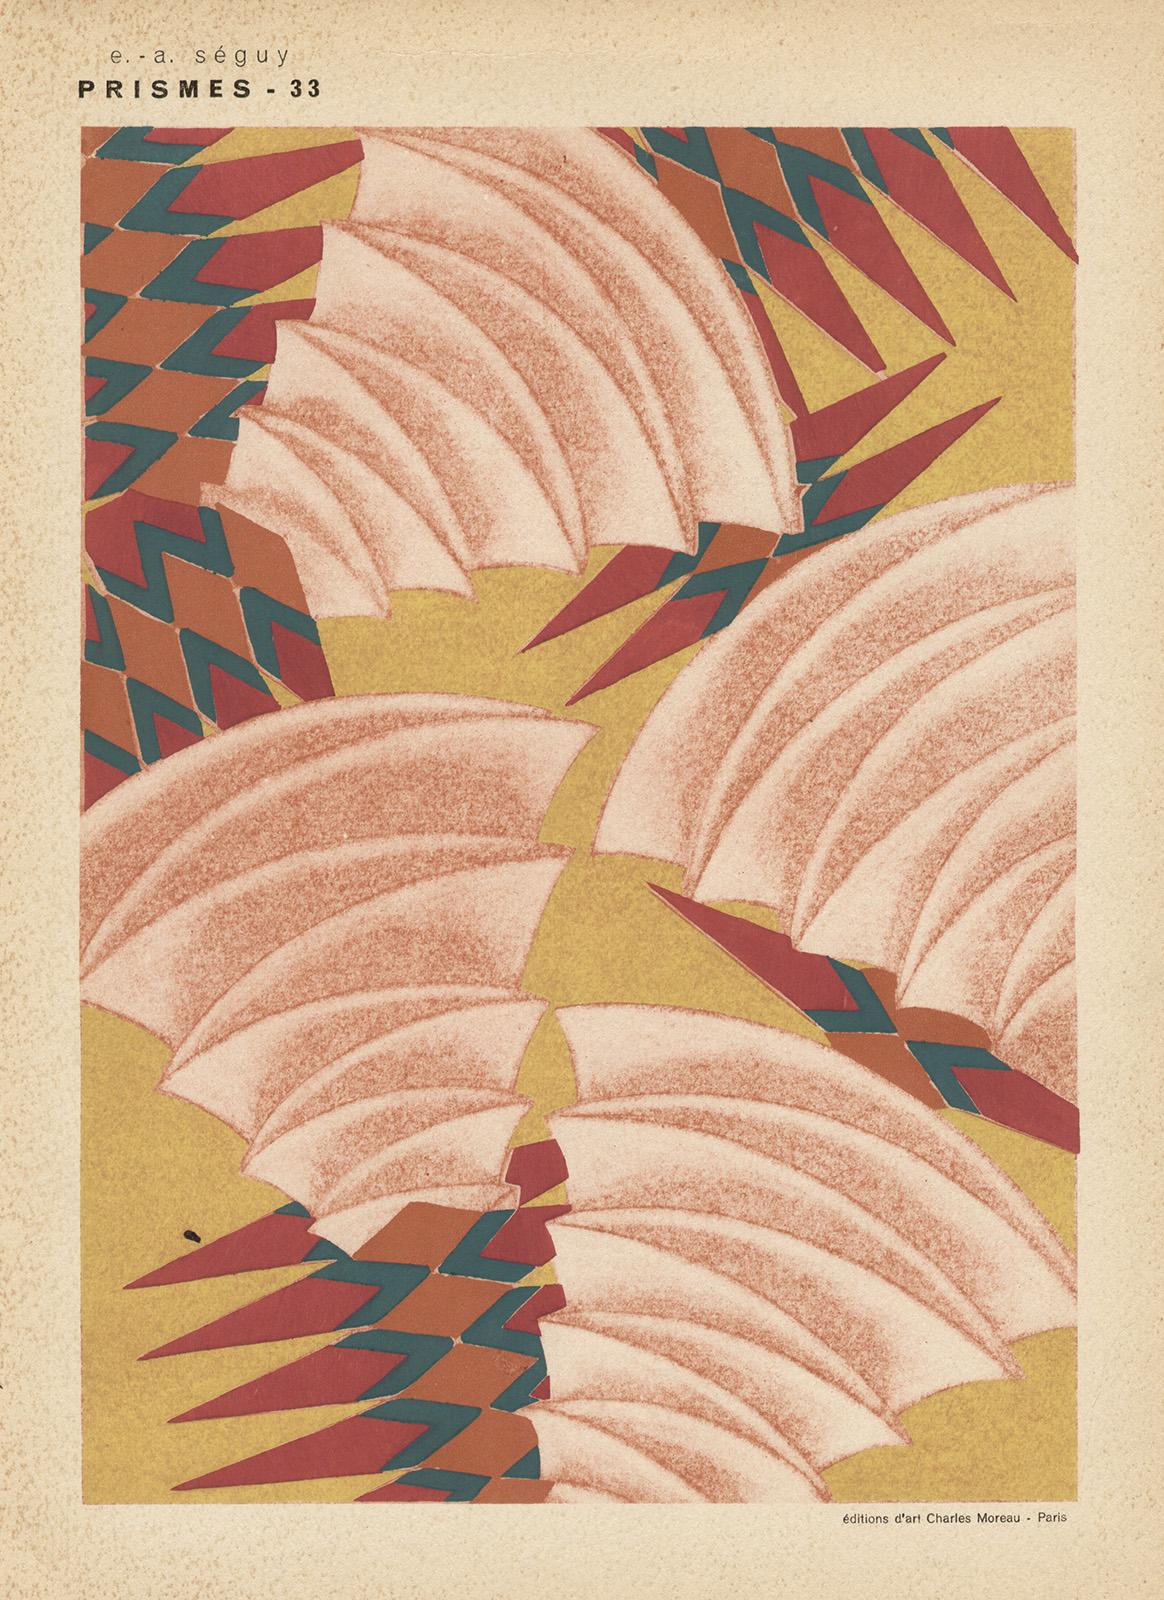 E.A. Seguy was an important decorative artist of the Art Nouveau and Art Deco periods. His graphic technique was achieved through hand-coloring prints through numerous plate stencils. Published by Charles Moreau in Paris.



